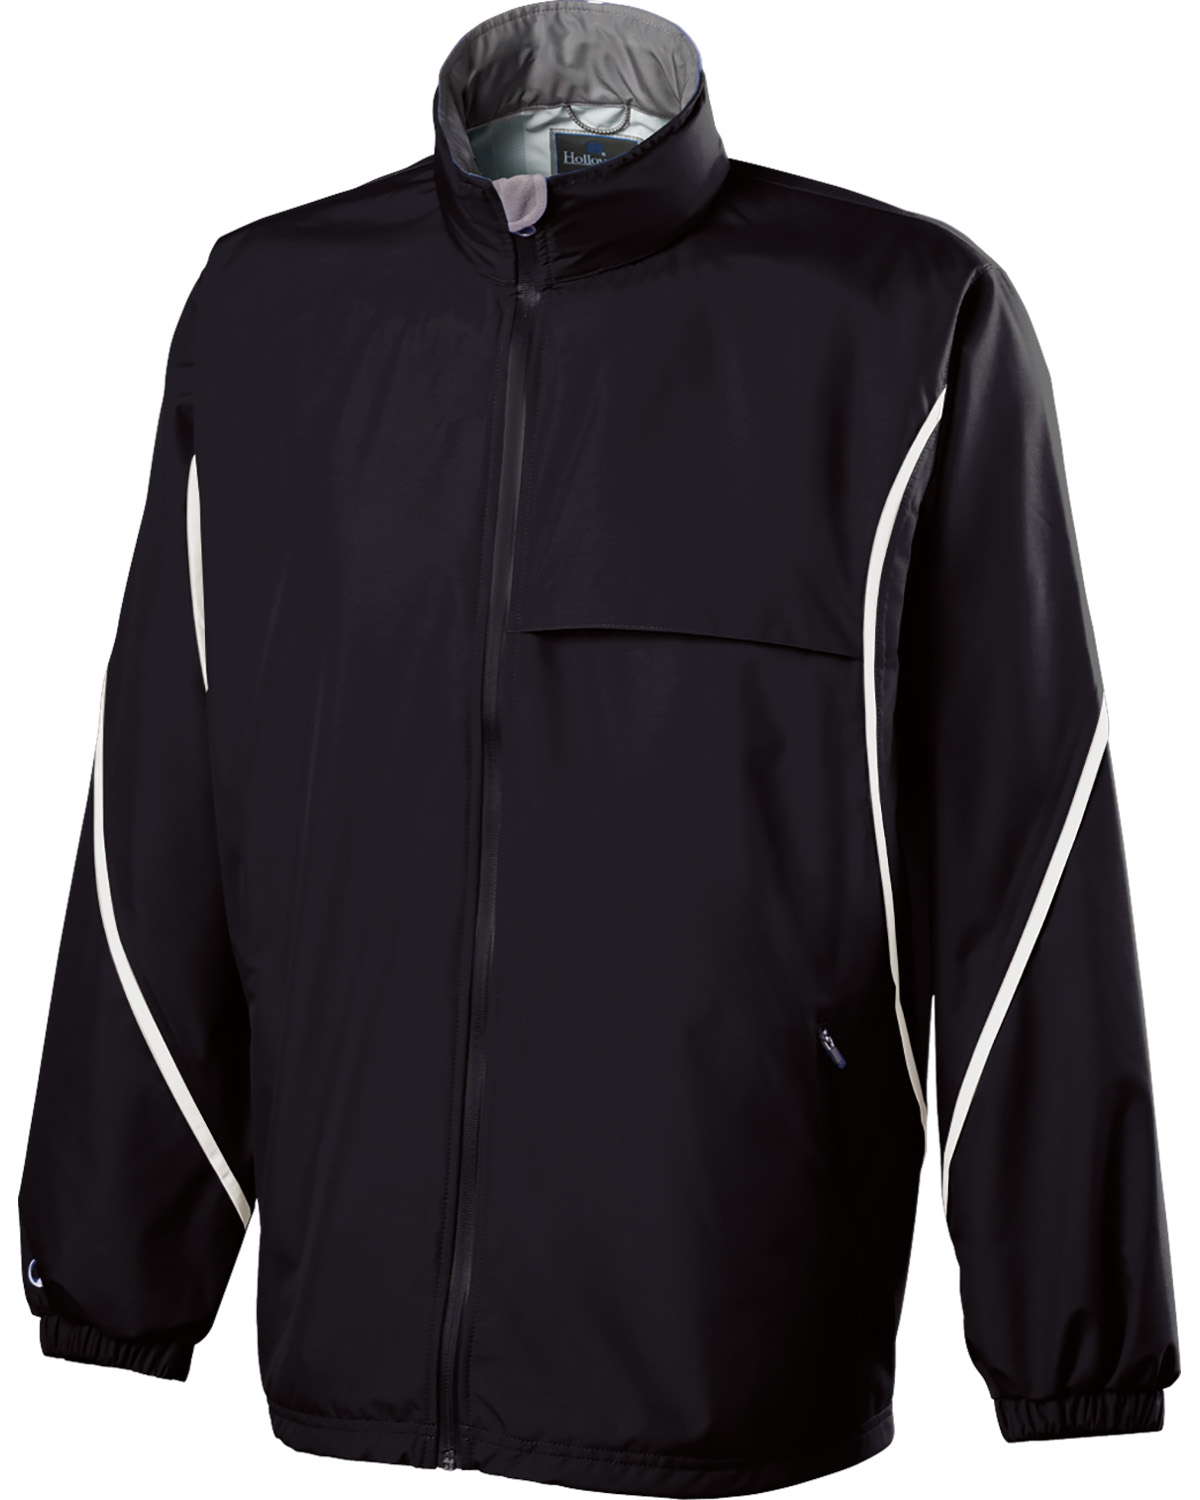 Holloway 229159 - Adult Polyester Full Zip Hooded Circulate Jacket